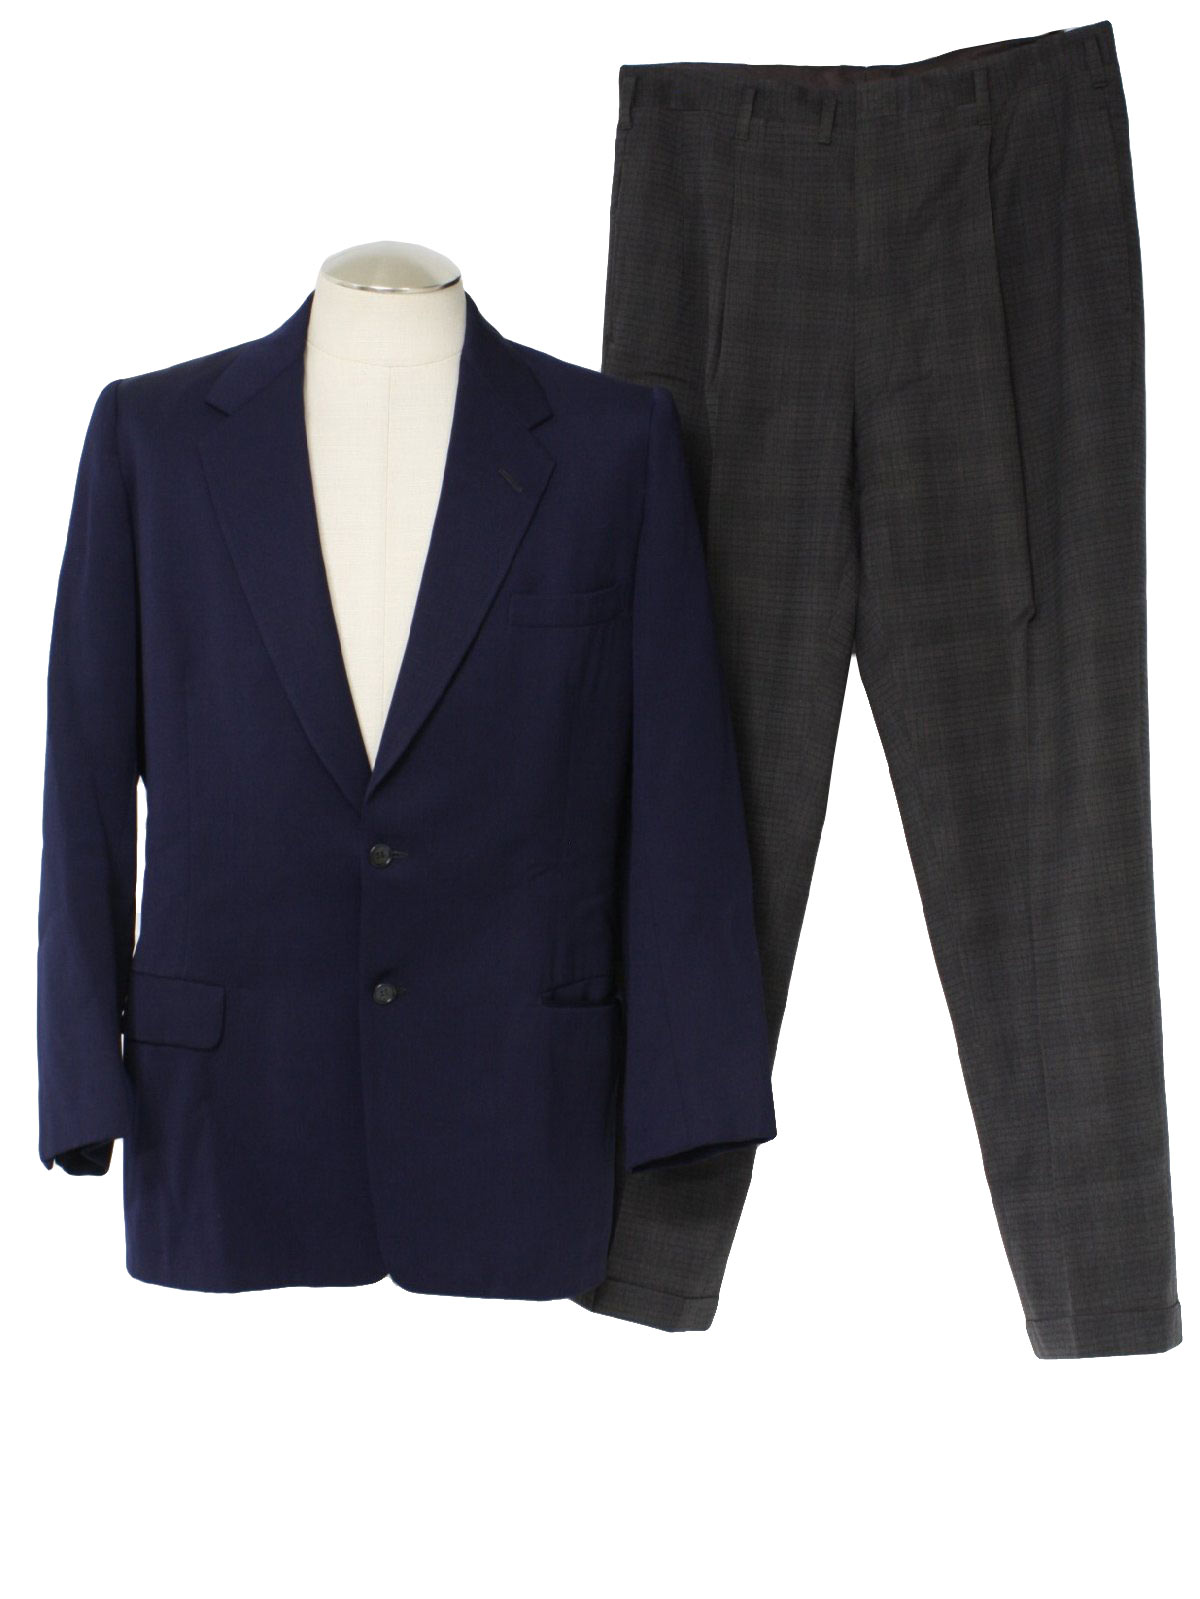 1950's Retro Suit: 1956 -Sears Individually Tailored- Mens two piece ...